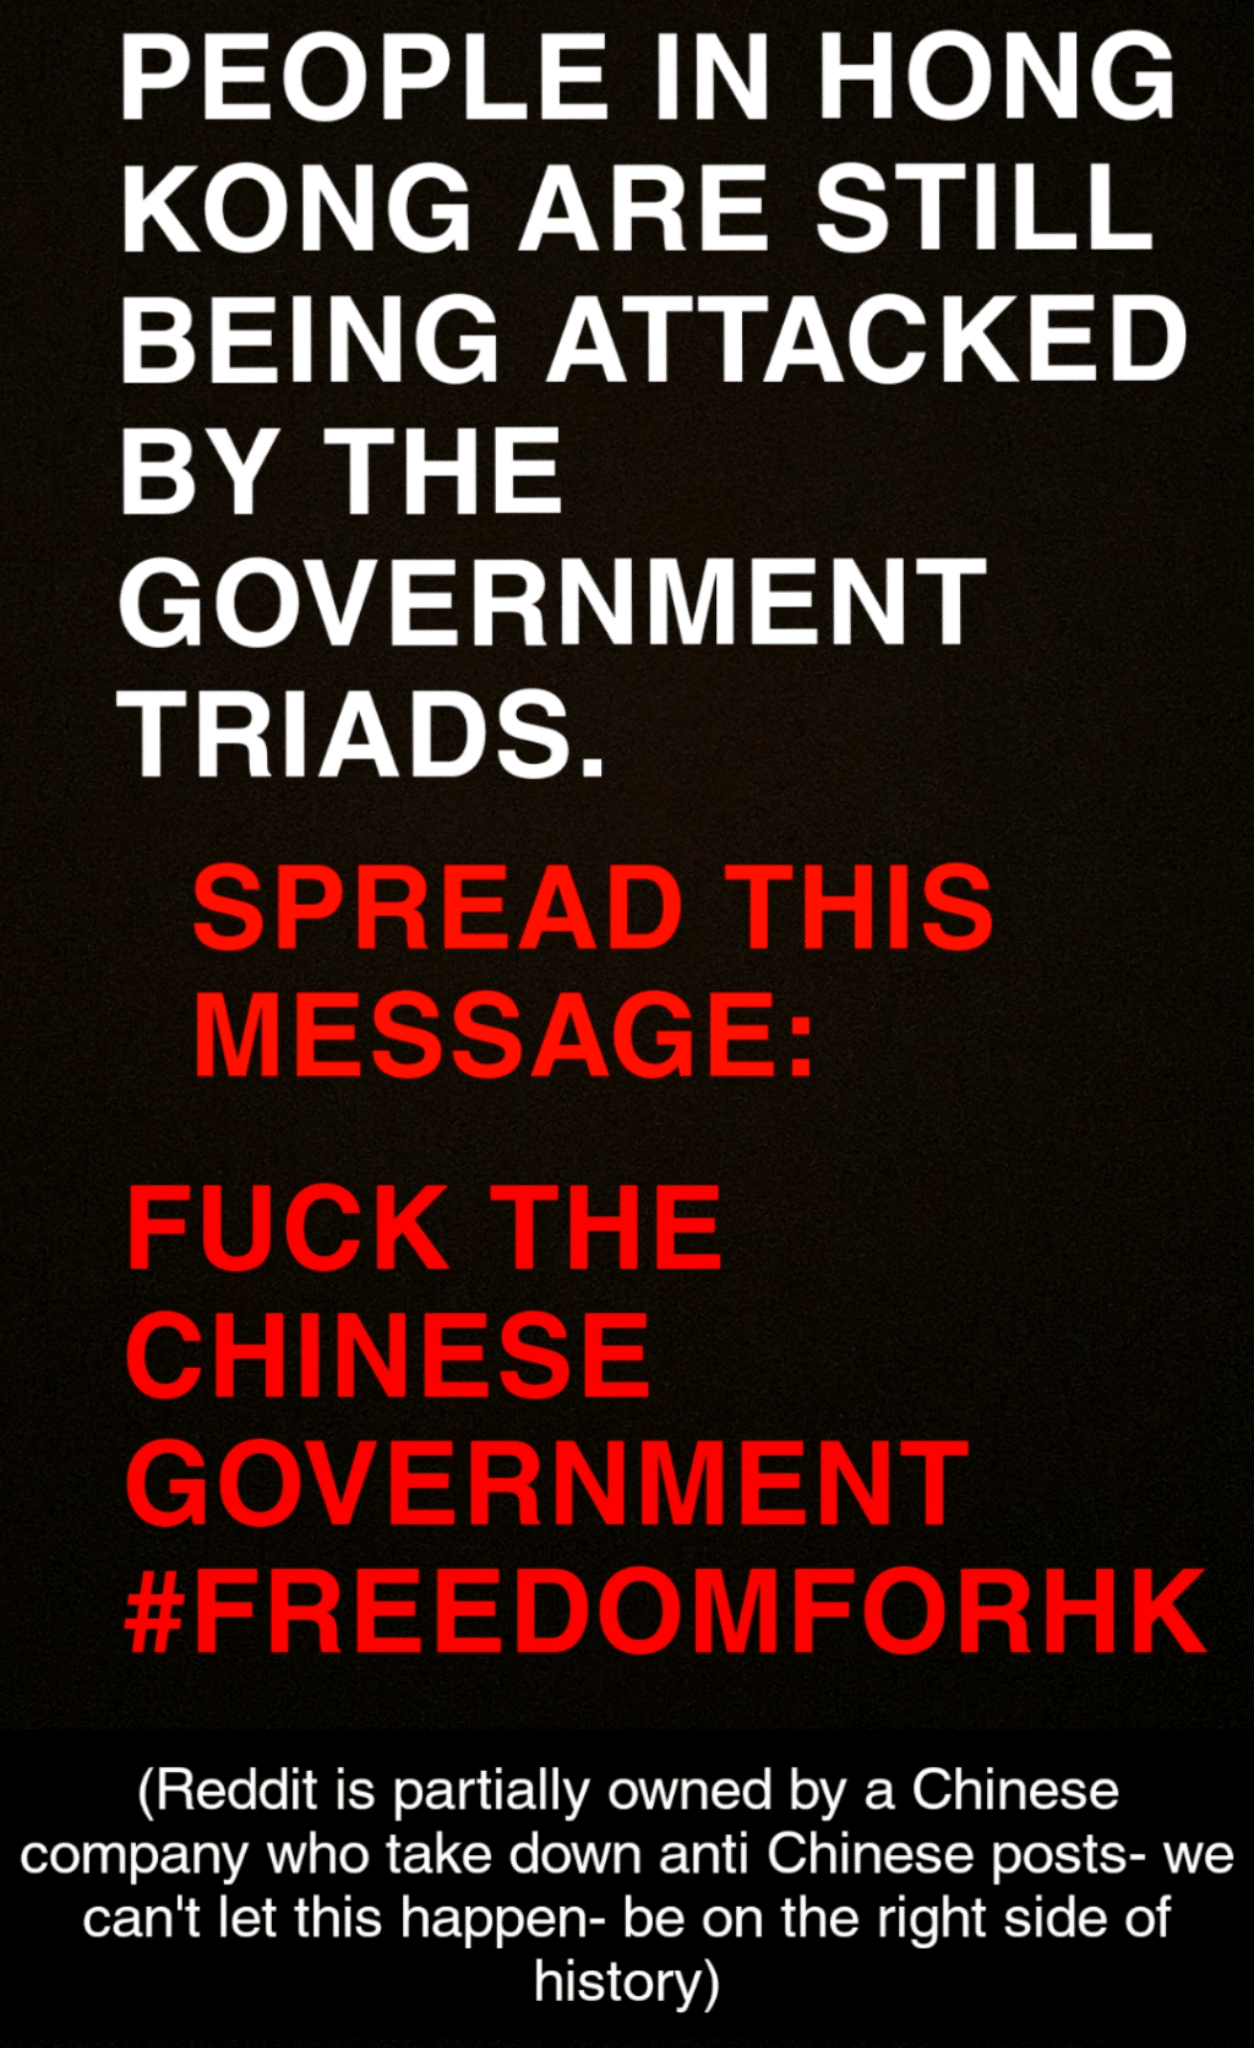 dank other-memes dank text: PEOPLE IN HONG KONG ARE STILL BEING ATTACKED BY THE GOVERNMENT TRIADS. SPREAD THIS MESSAGE: FUCI( THE CHINESE GOVERNMENT #FREEDOMFORHK (Reddit is partially owned by a Chinese company who take down anti Chinese posts- we cant let this happen- be on the right side of history) 